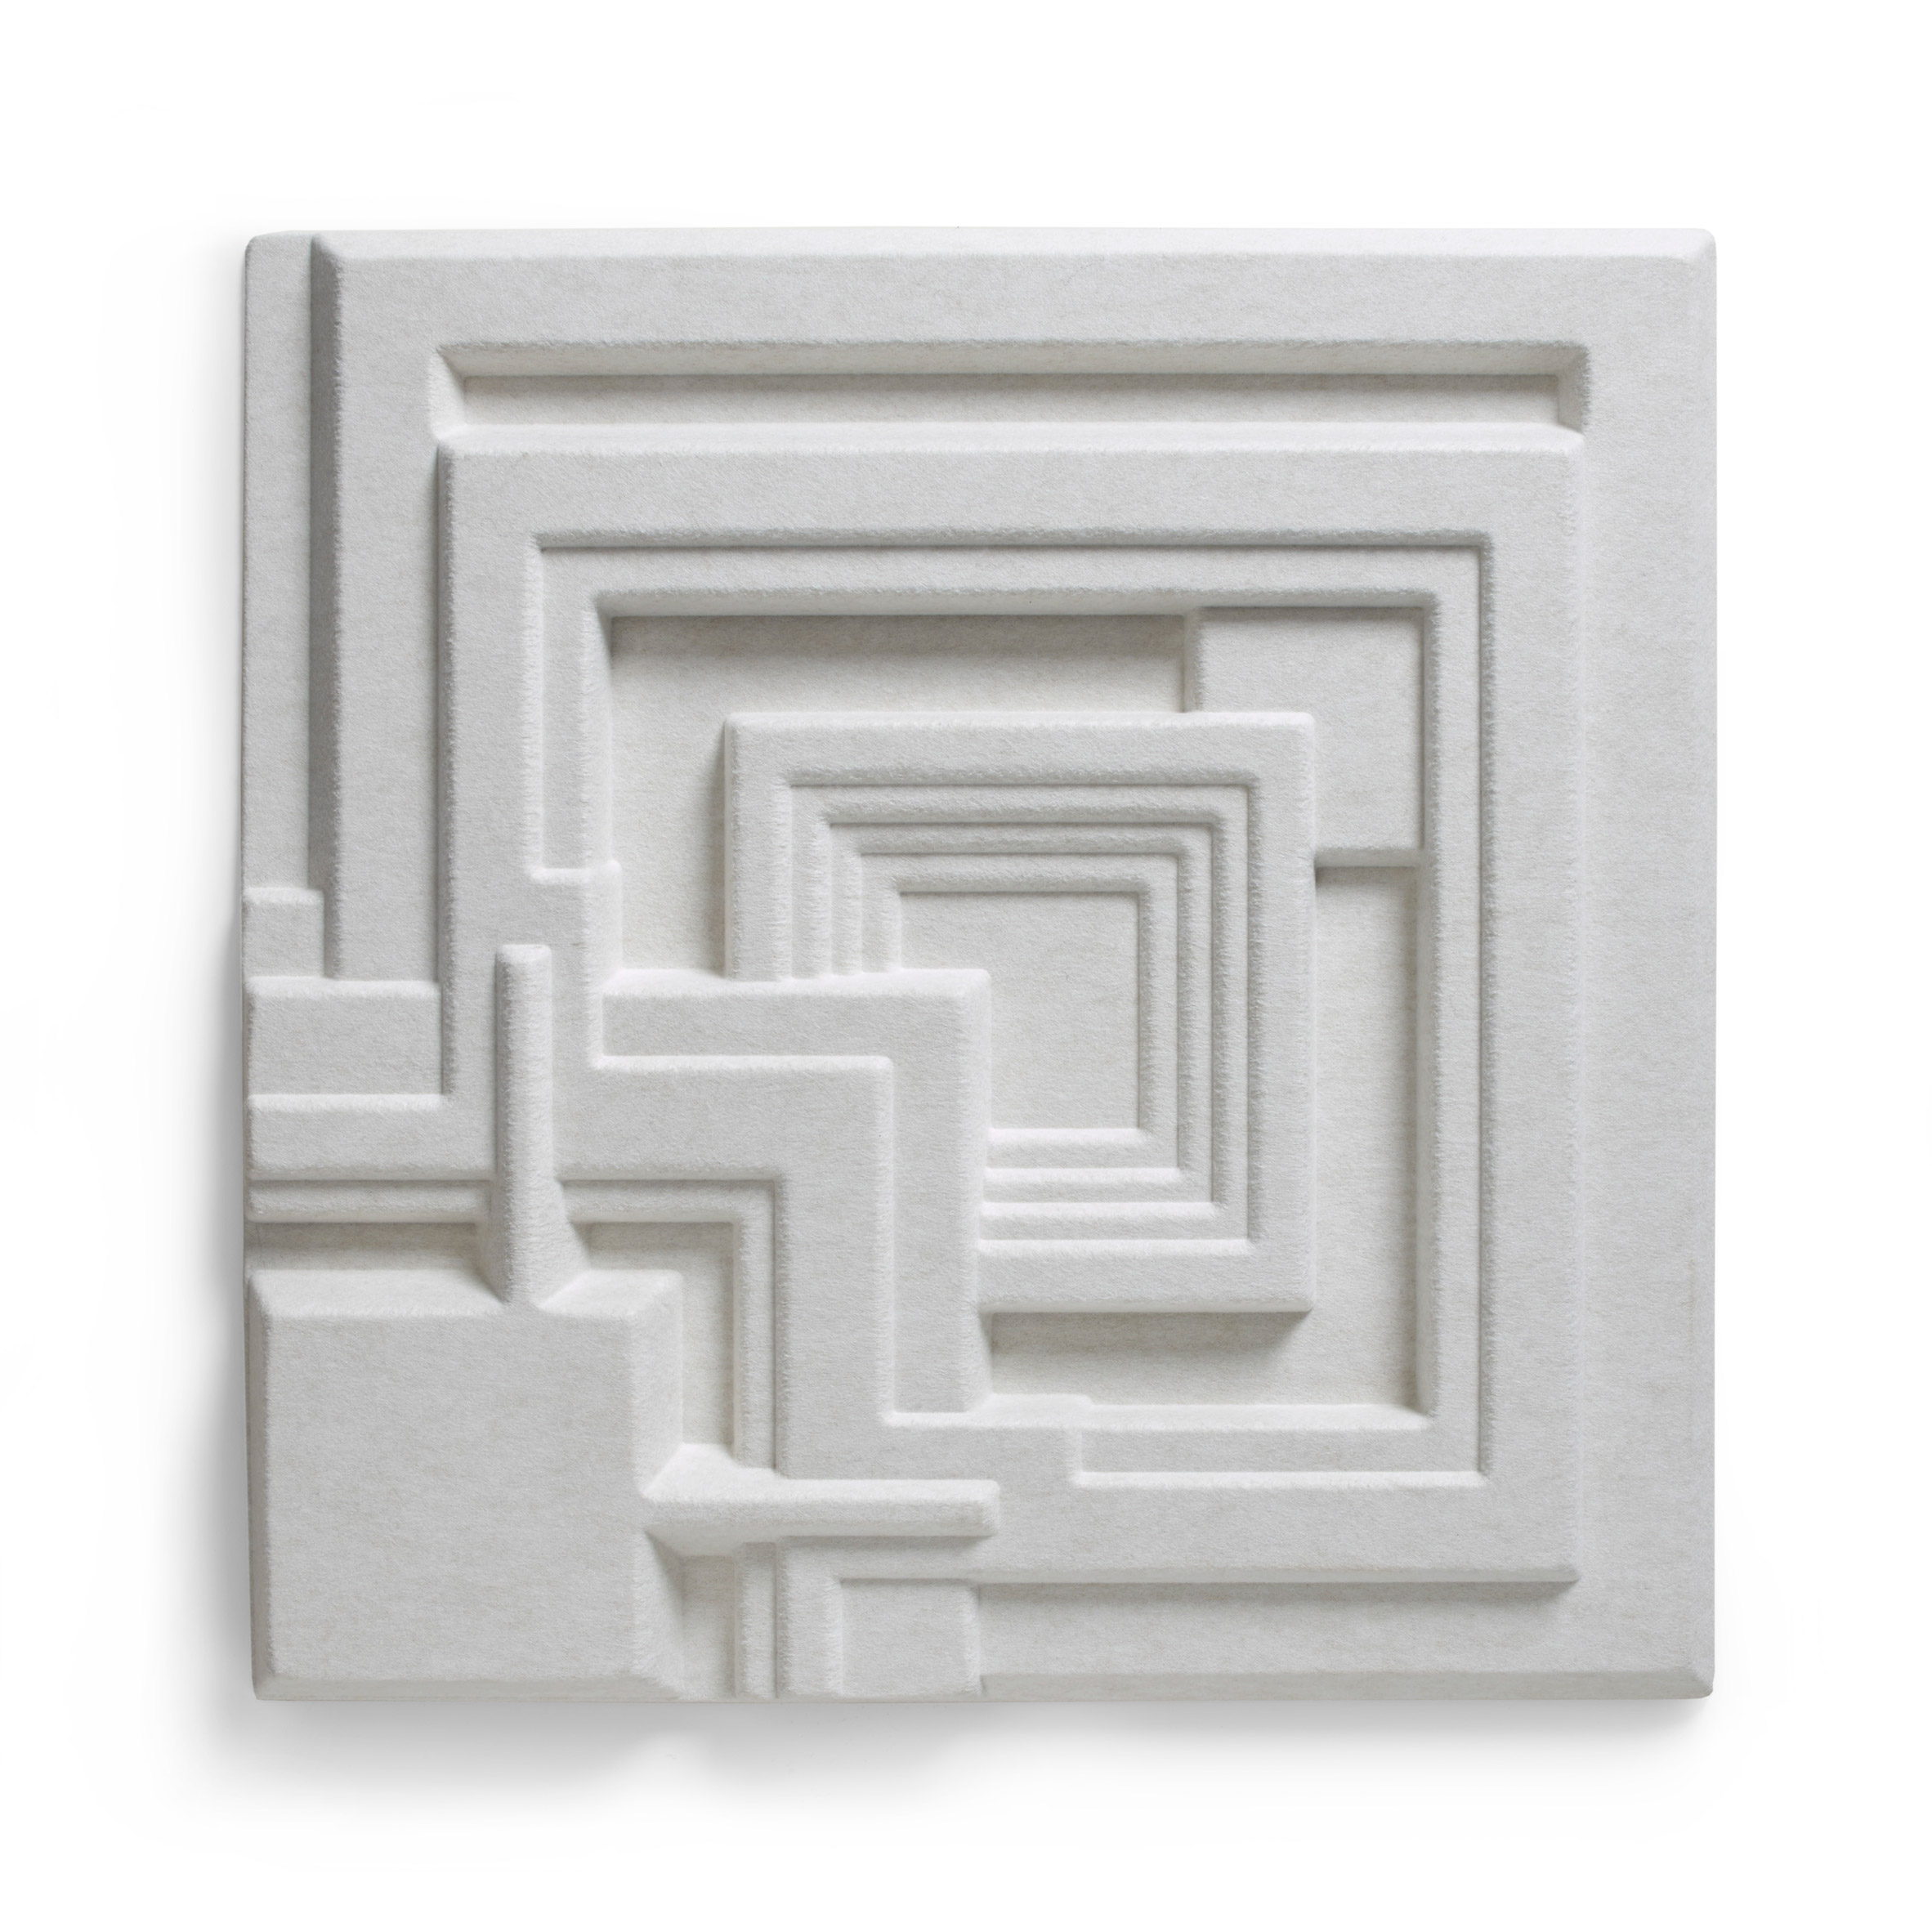 Offecct recreates the tiles of Frank Lloyd Wright's historic Ennis House